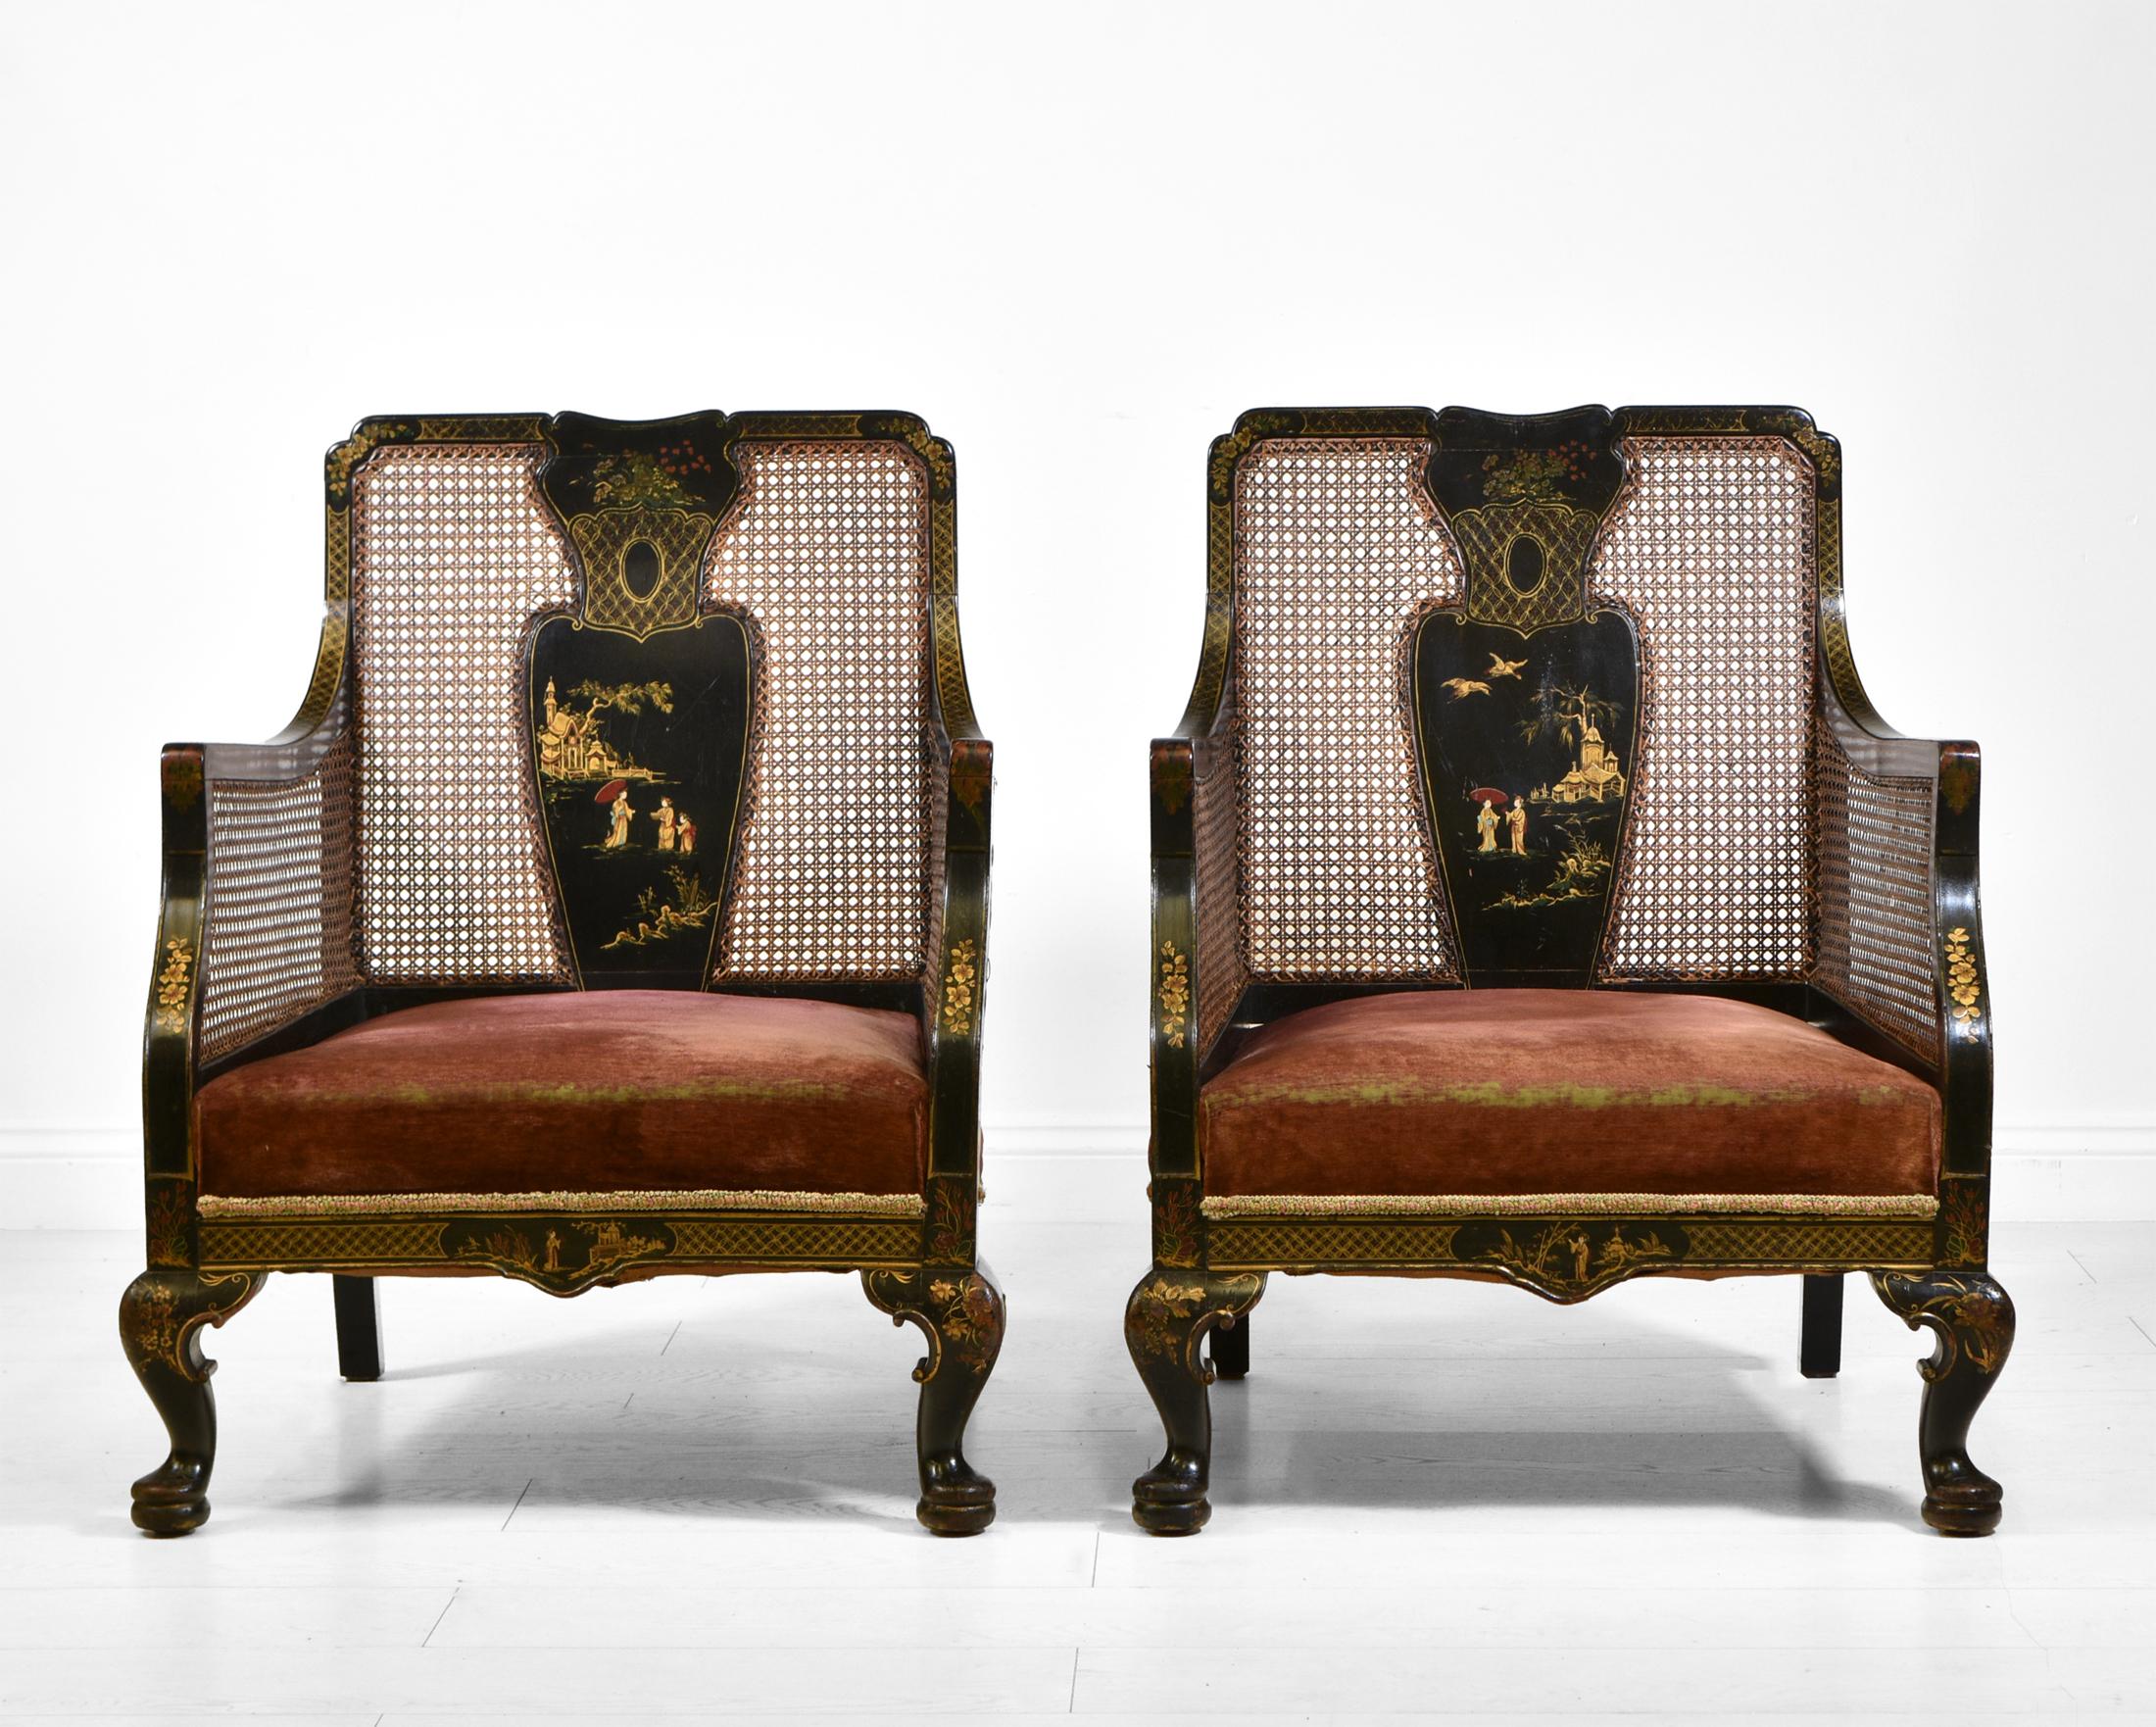 A wonderful pair of japanned and gilt chinoiserie bergere armchairs. Retailer's label: F. Restall Ltd, Birmingham. English. Circa 1920.

*Free delivery for all areas in mainland England & Wales only. Delivery to room of choice by a two person team.